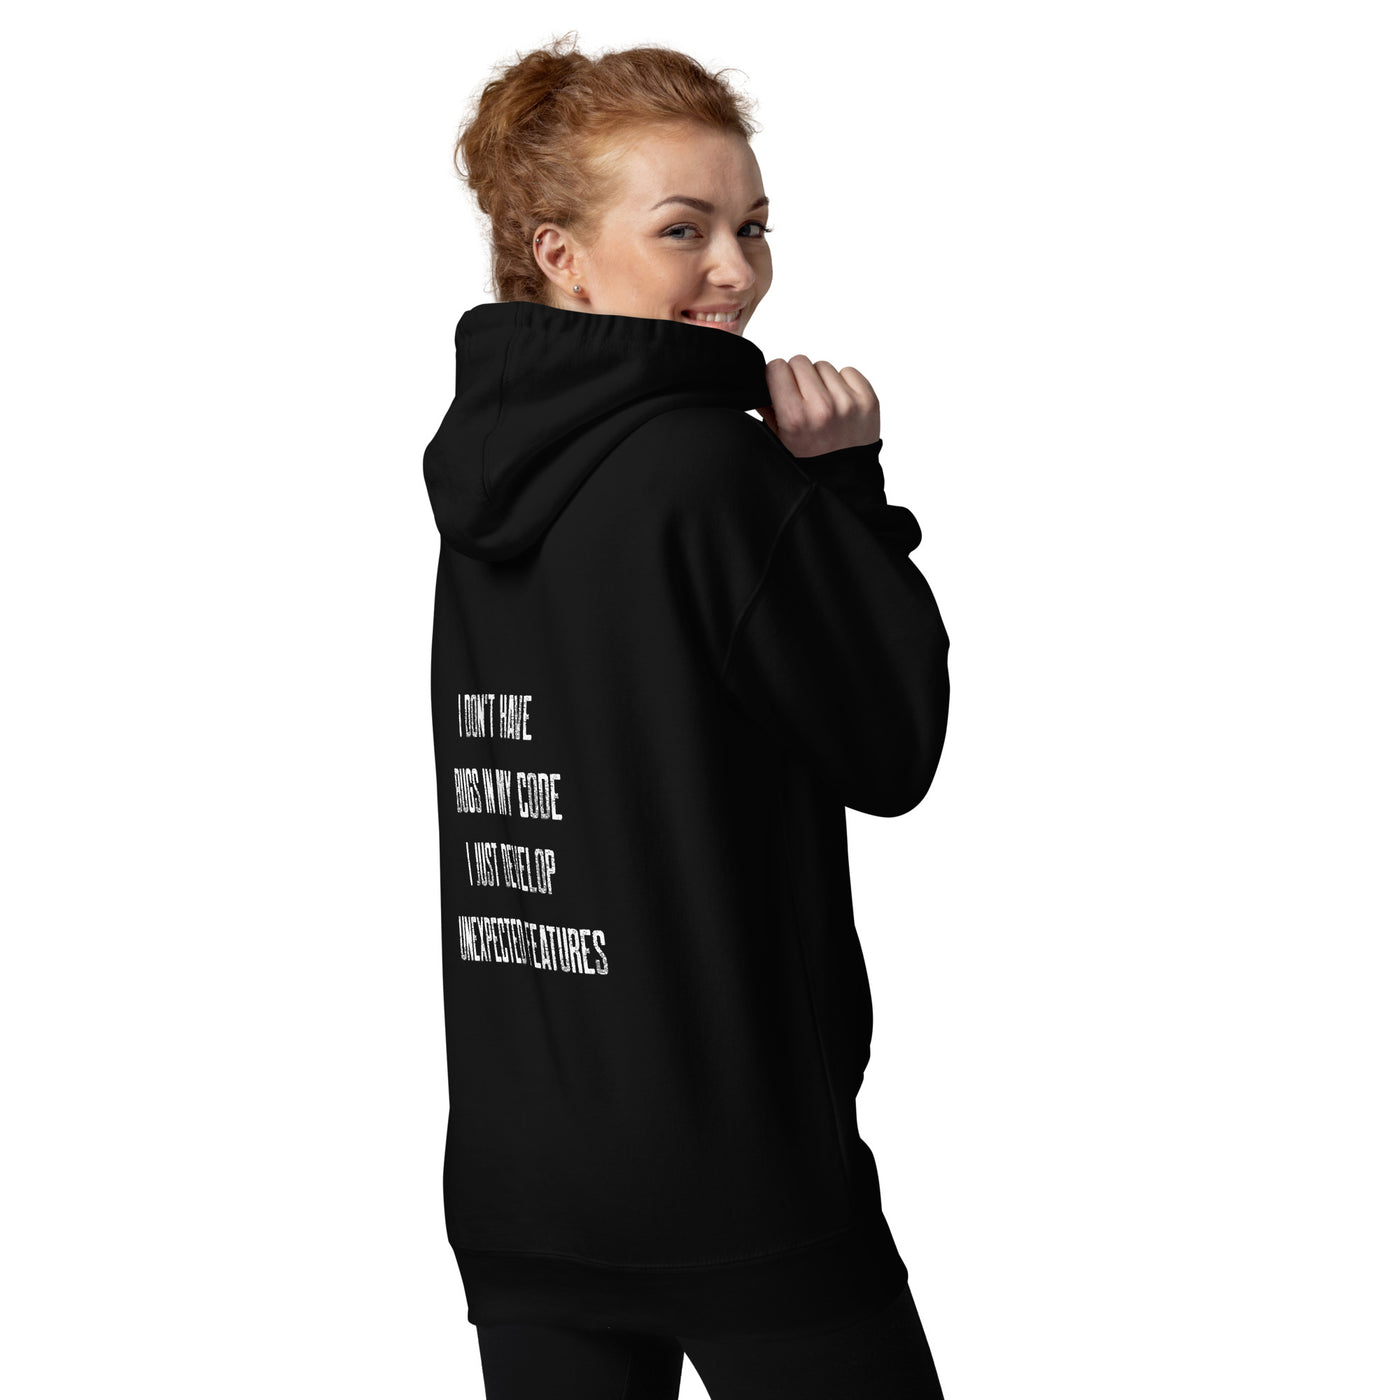 I don't Have bugs in my code, I just Develop unexpected features V2 - Unisex Hoodie